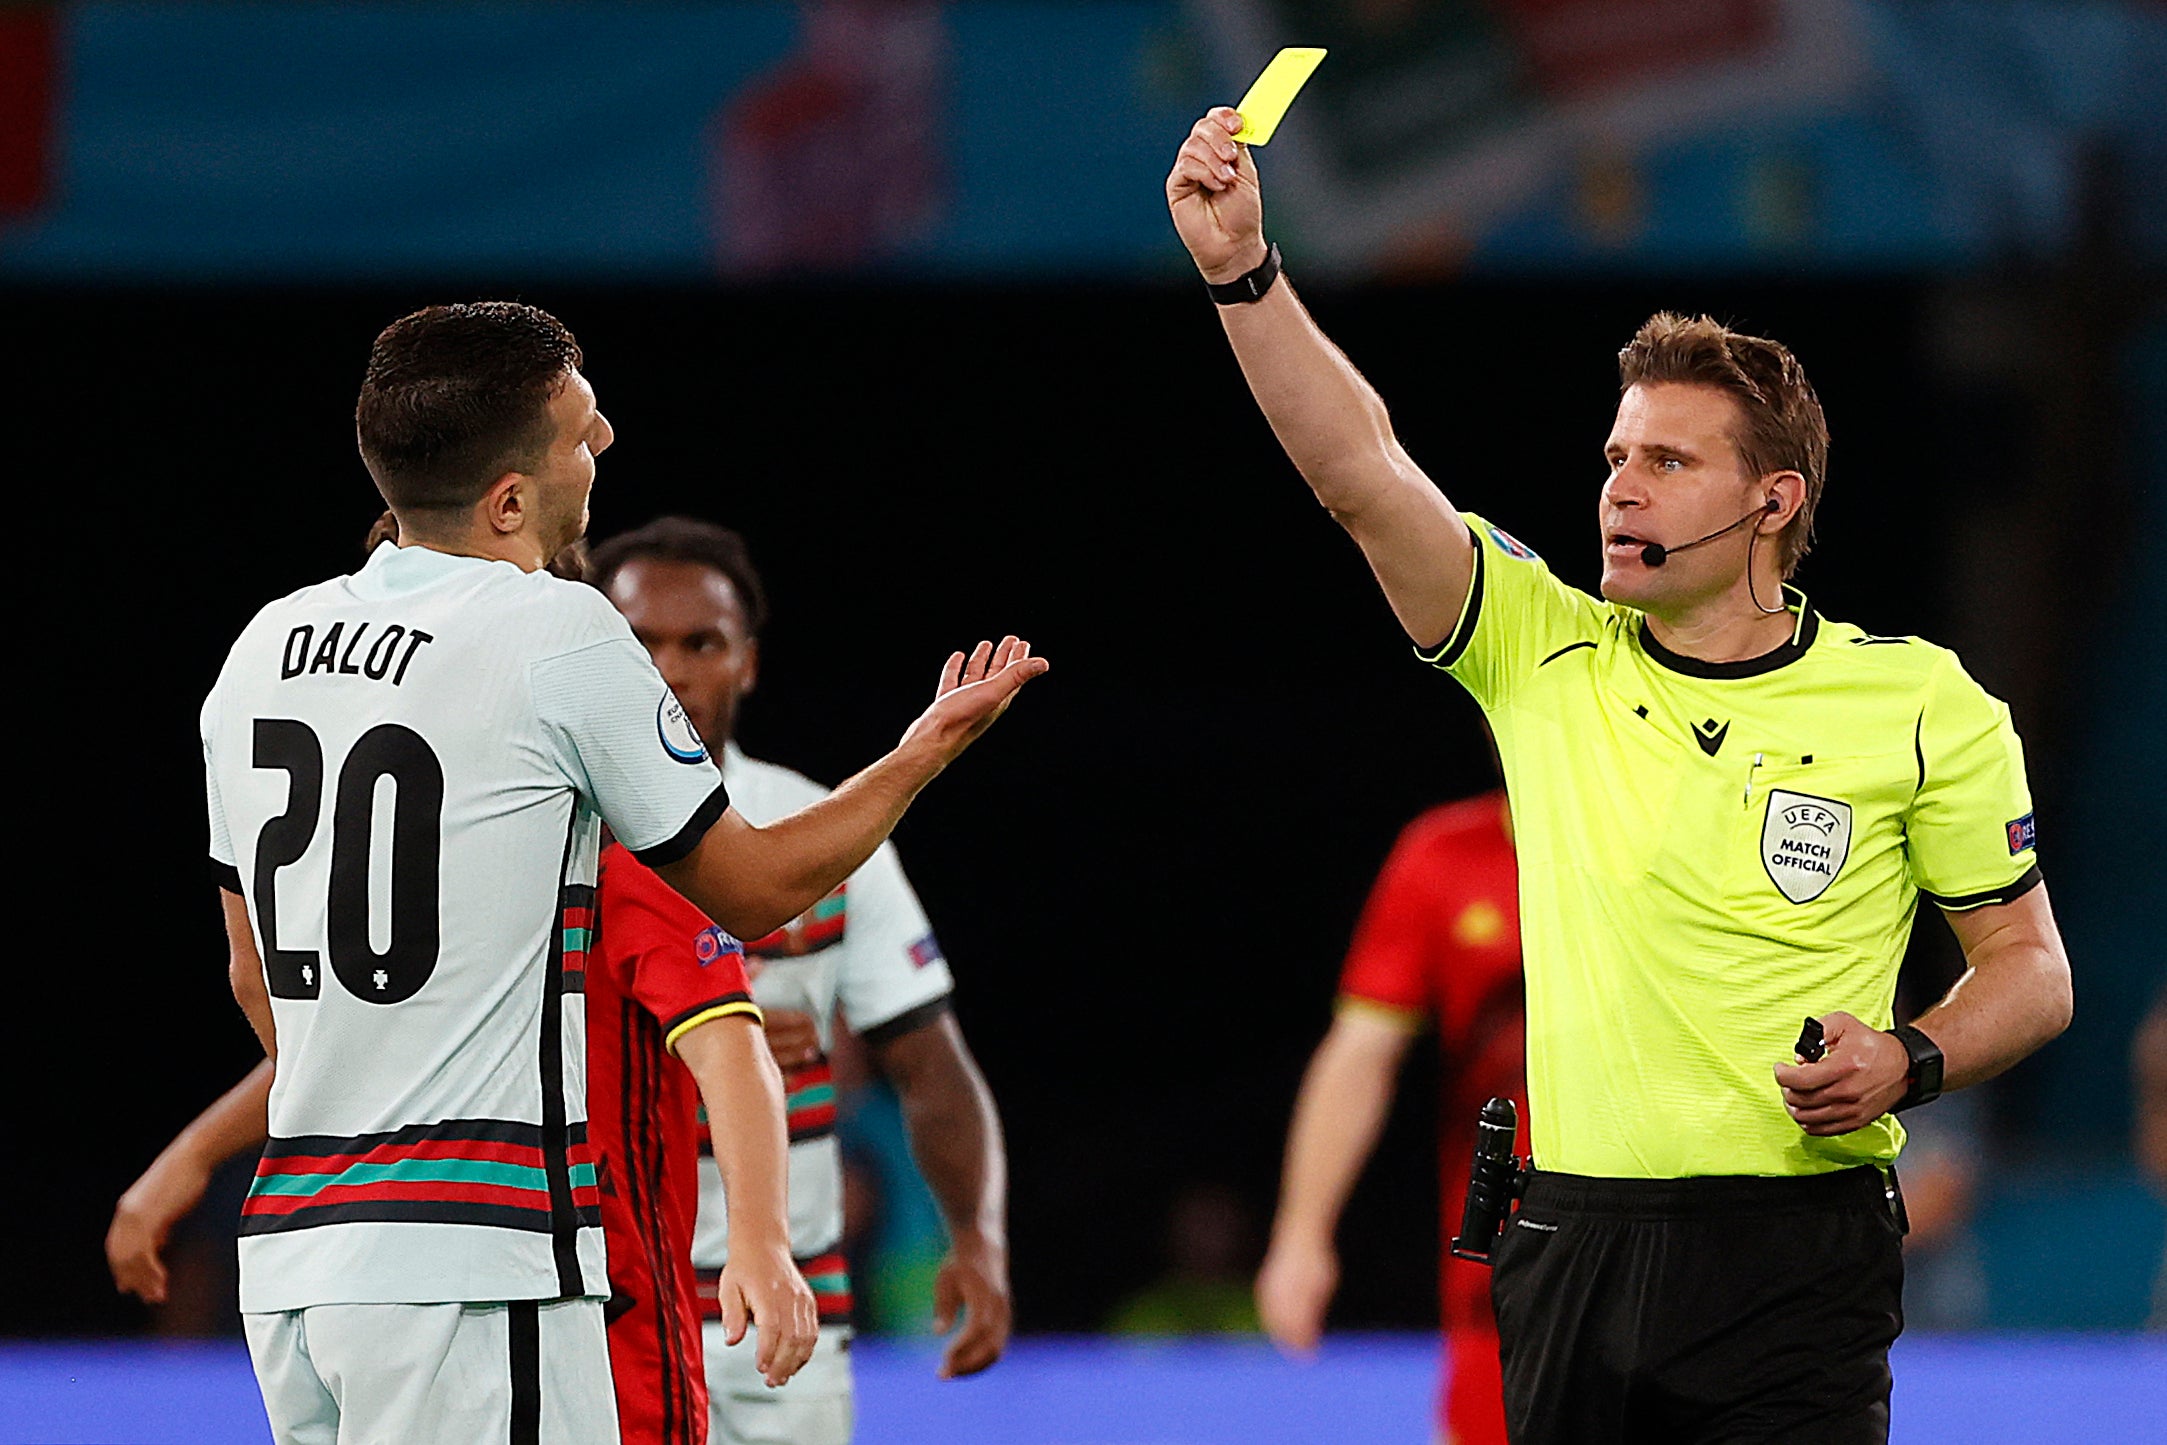 German referee Felix Brych presents a yellow card to Diogo Dalot